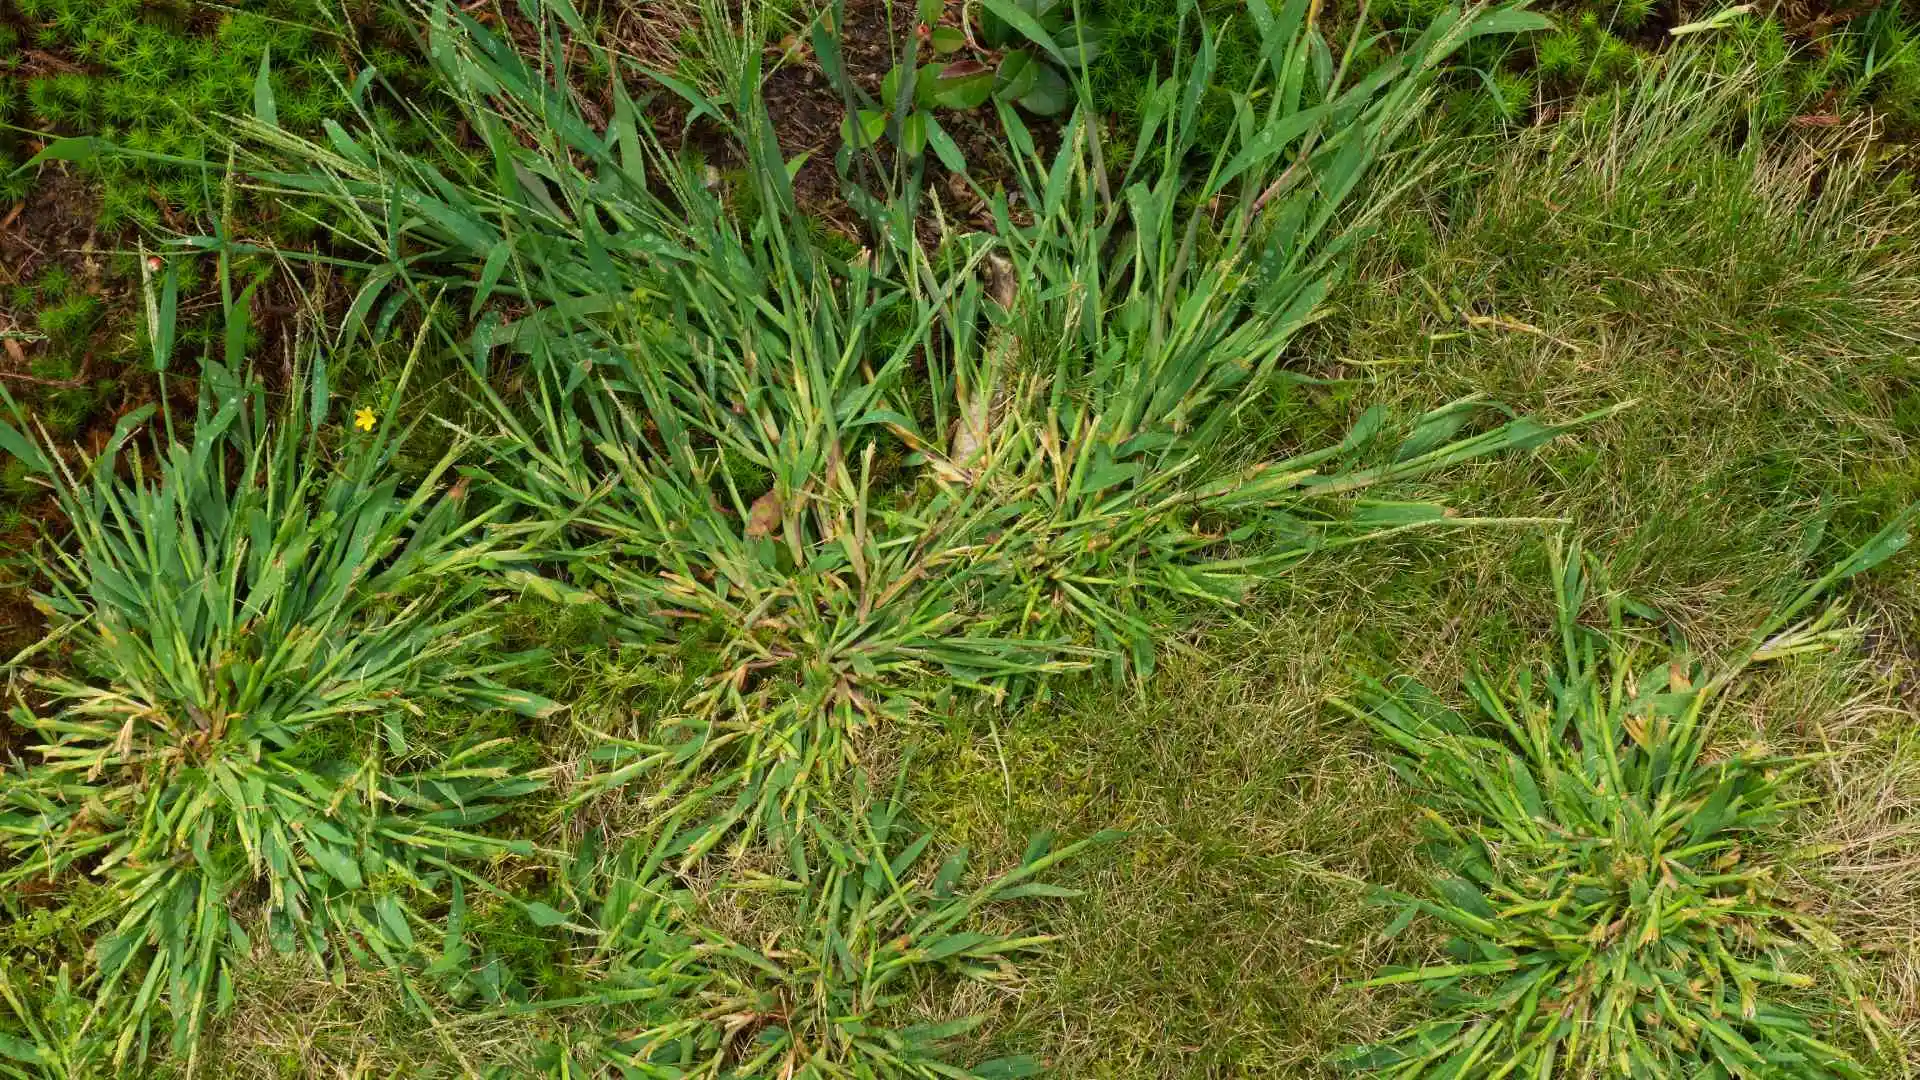 Weed infested lawn in Zionsville, IN.